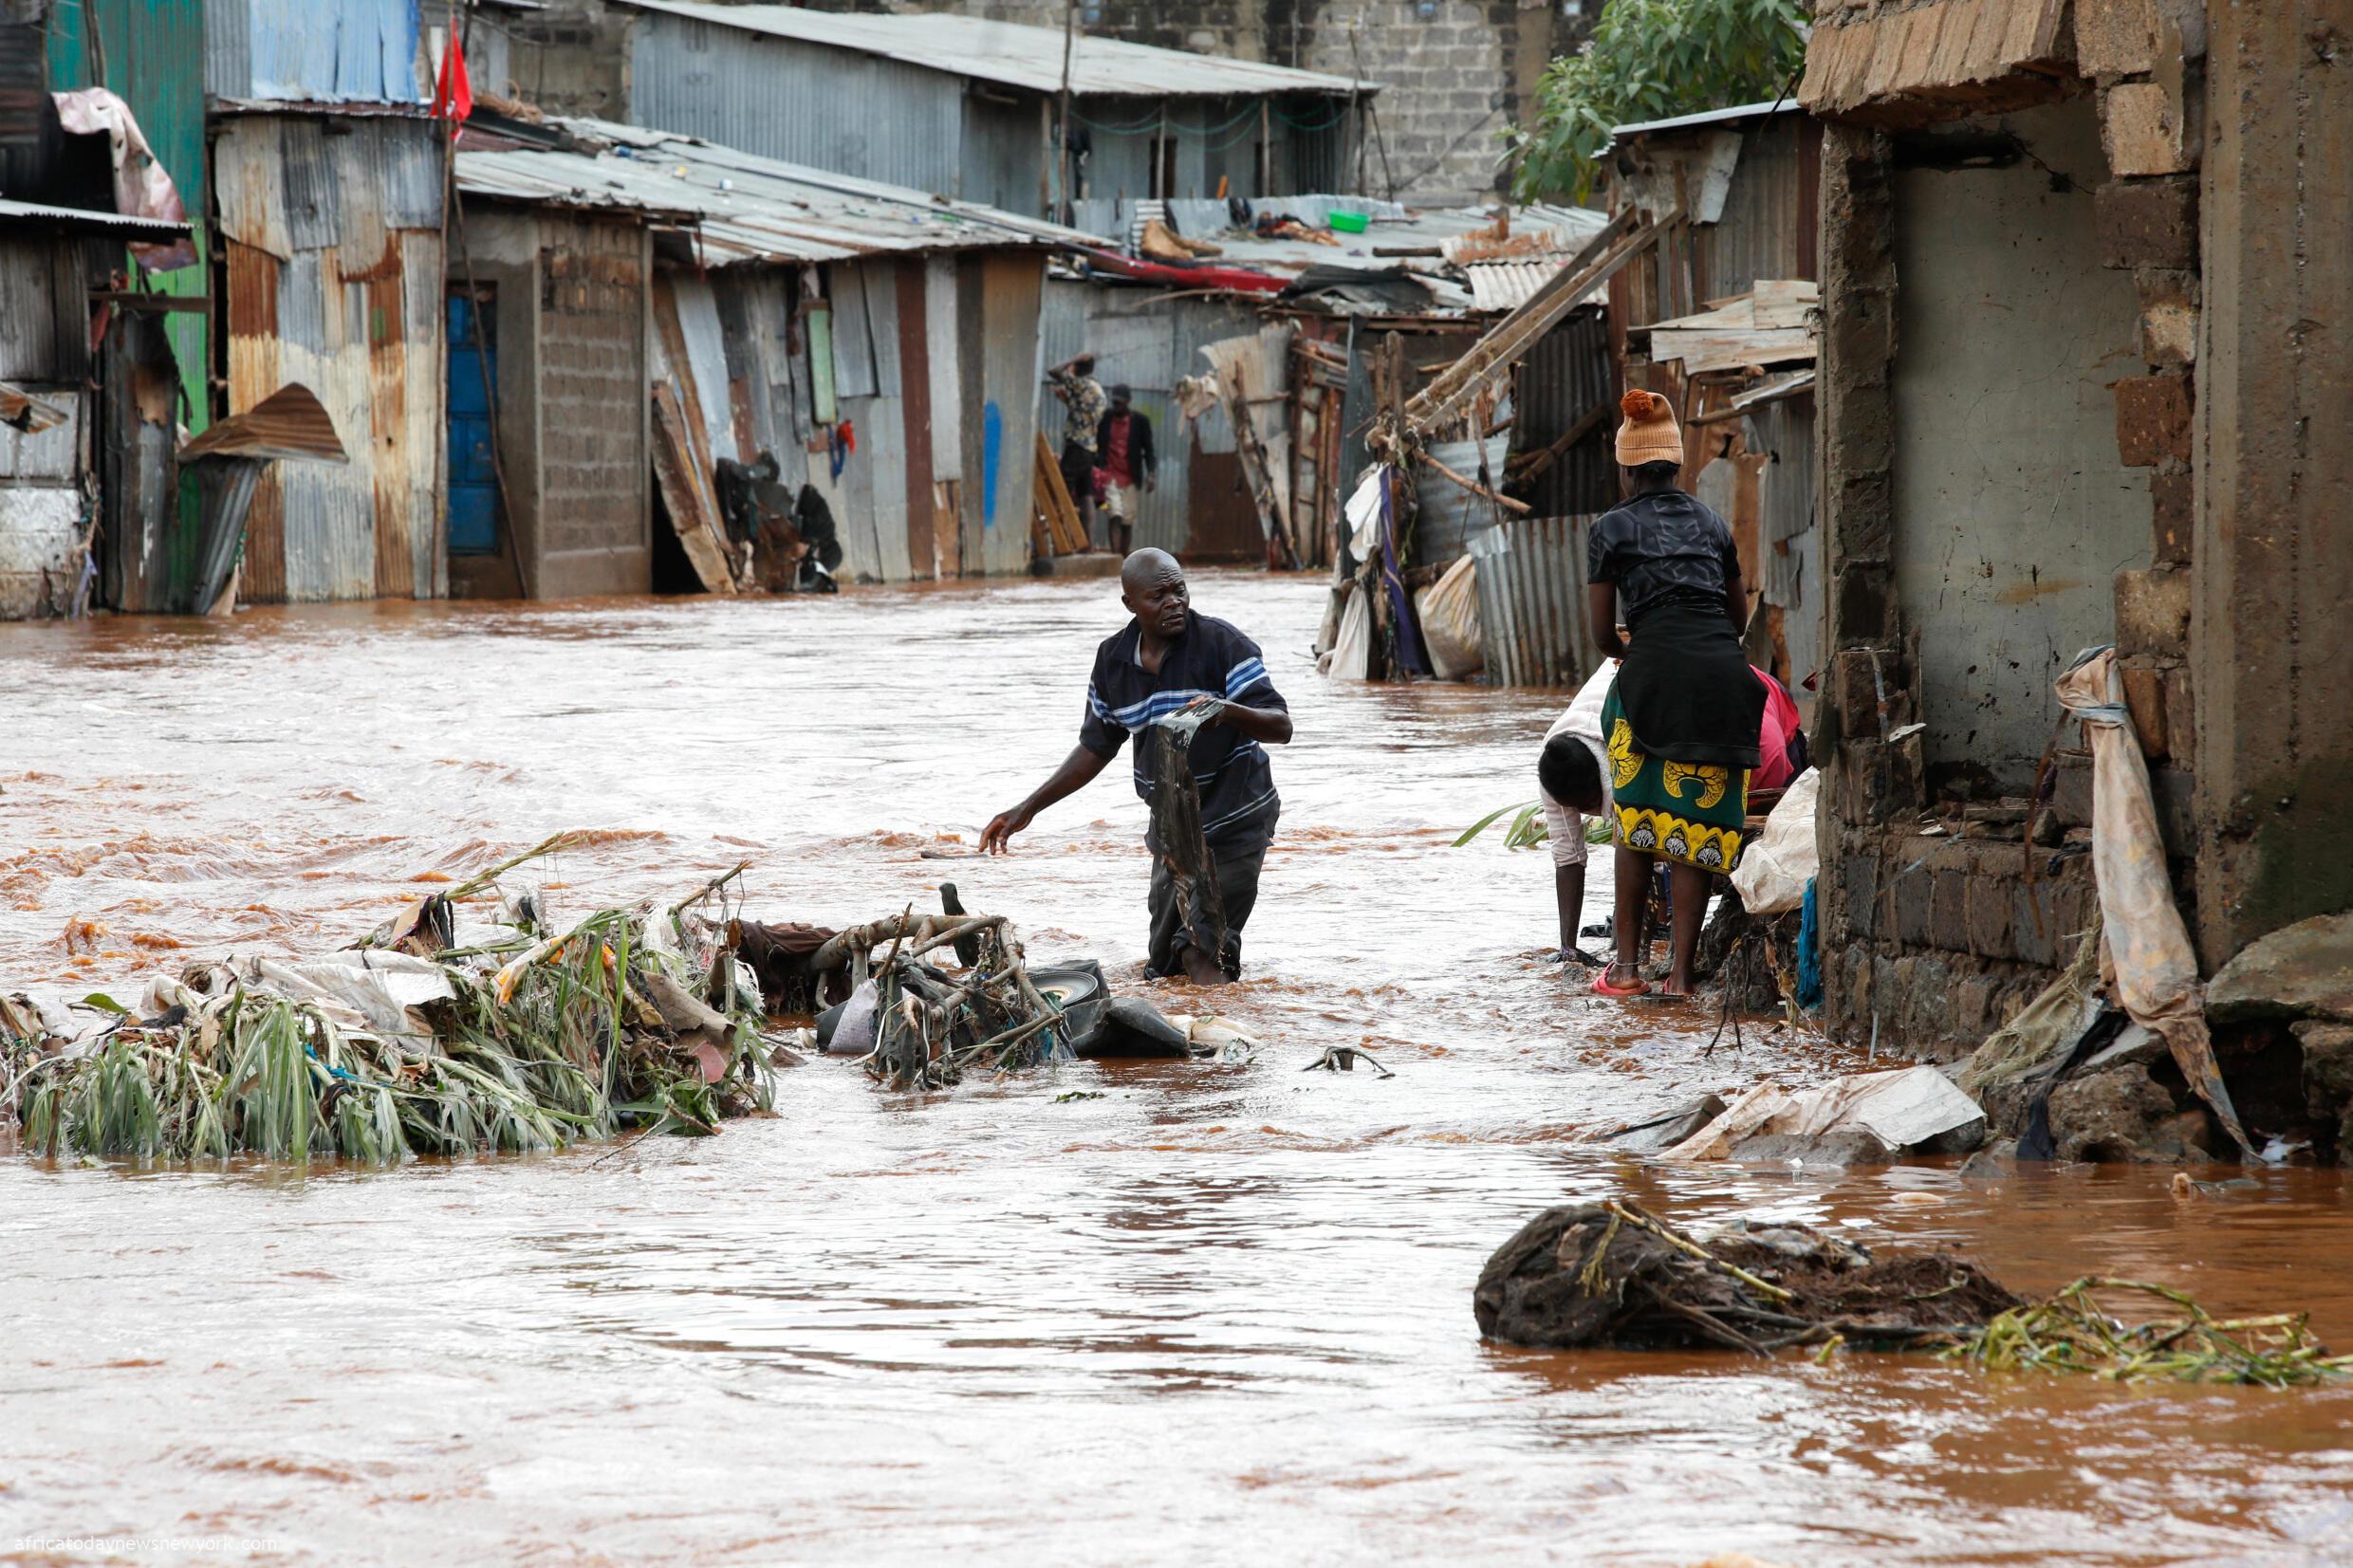 How Floods, Landslides Killed Over 150 In Tanzania - PM